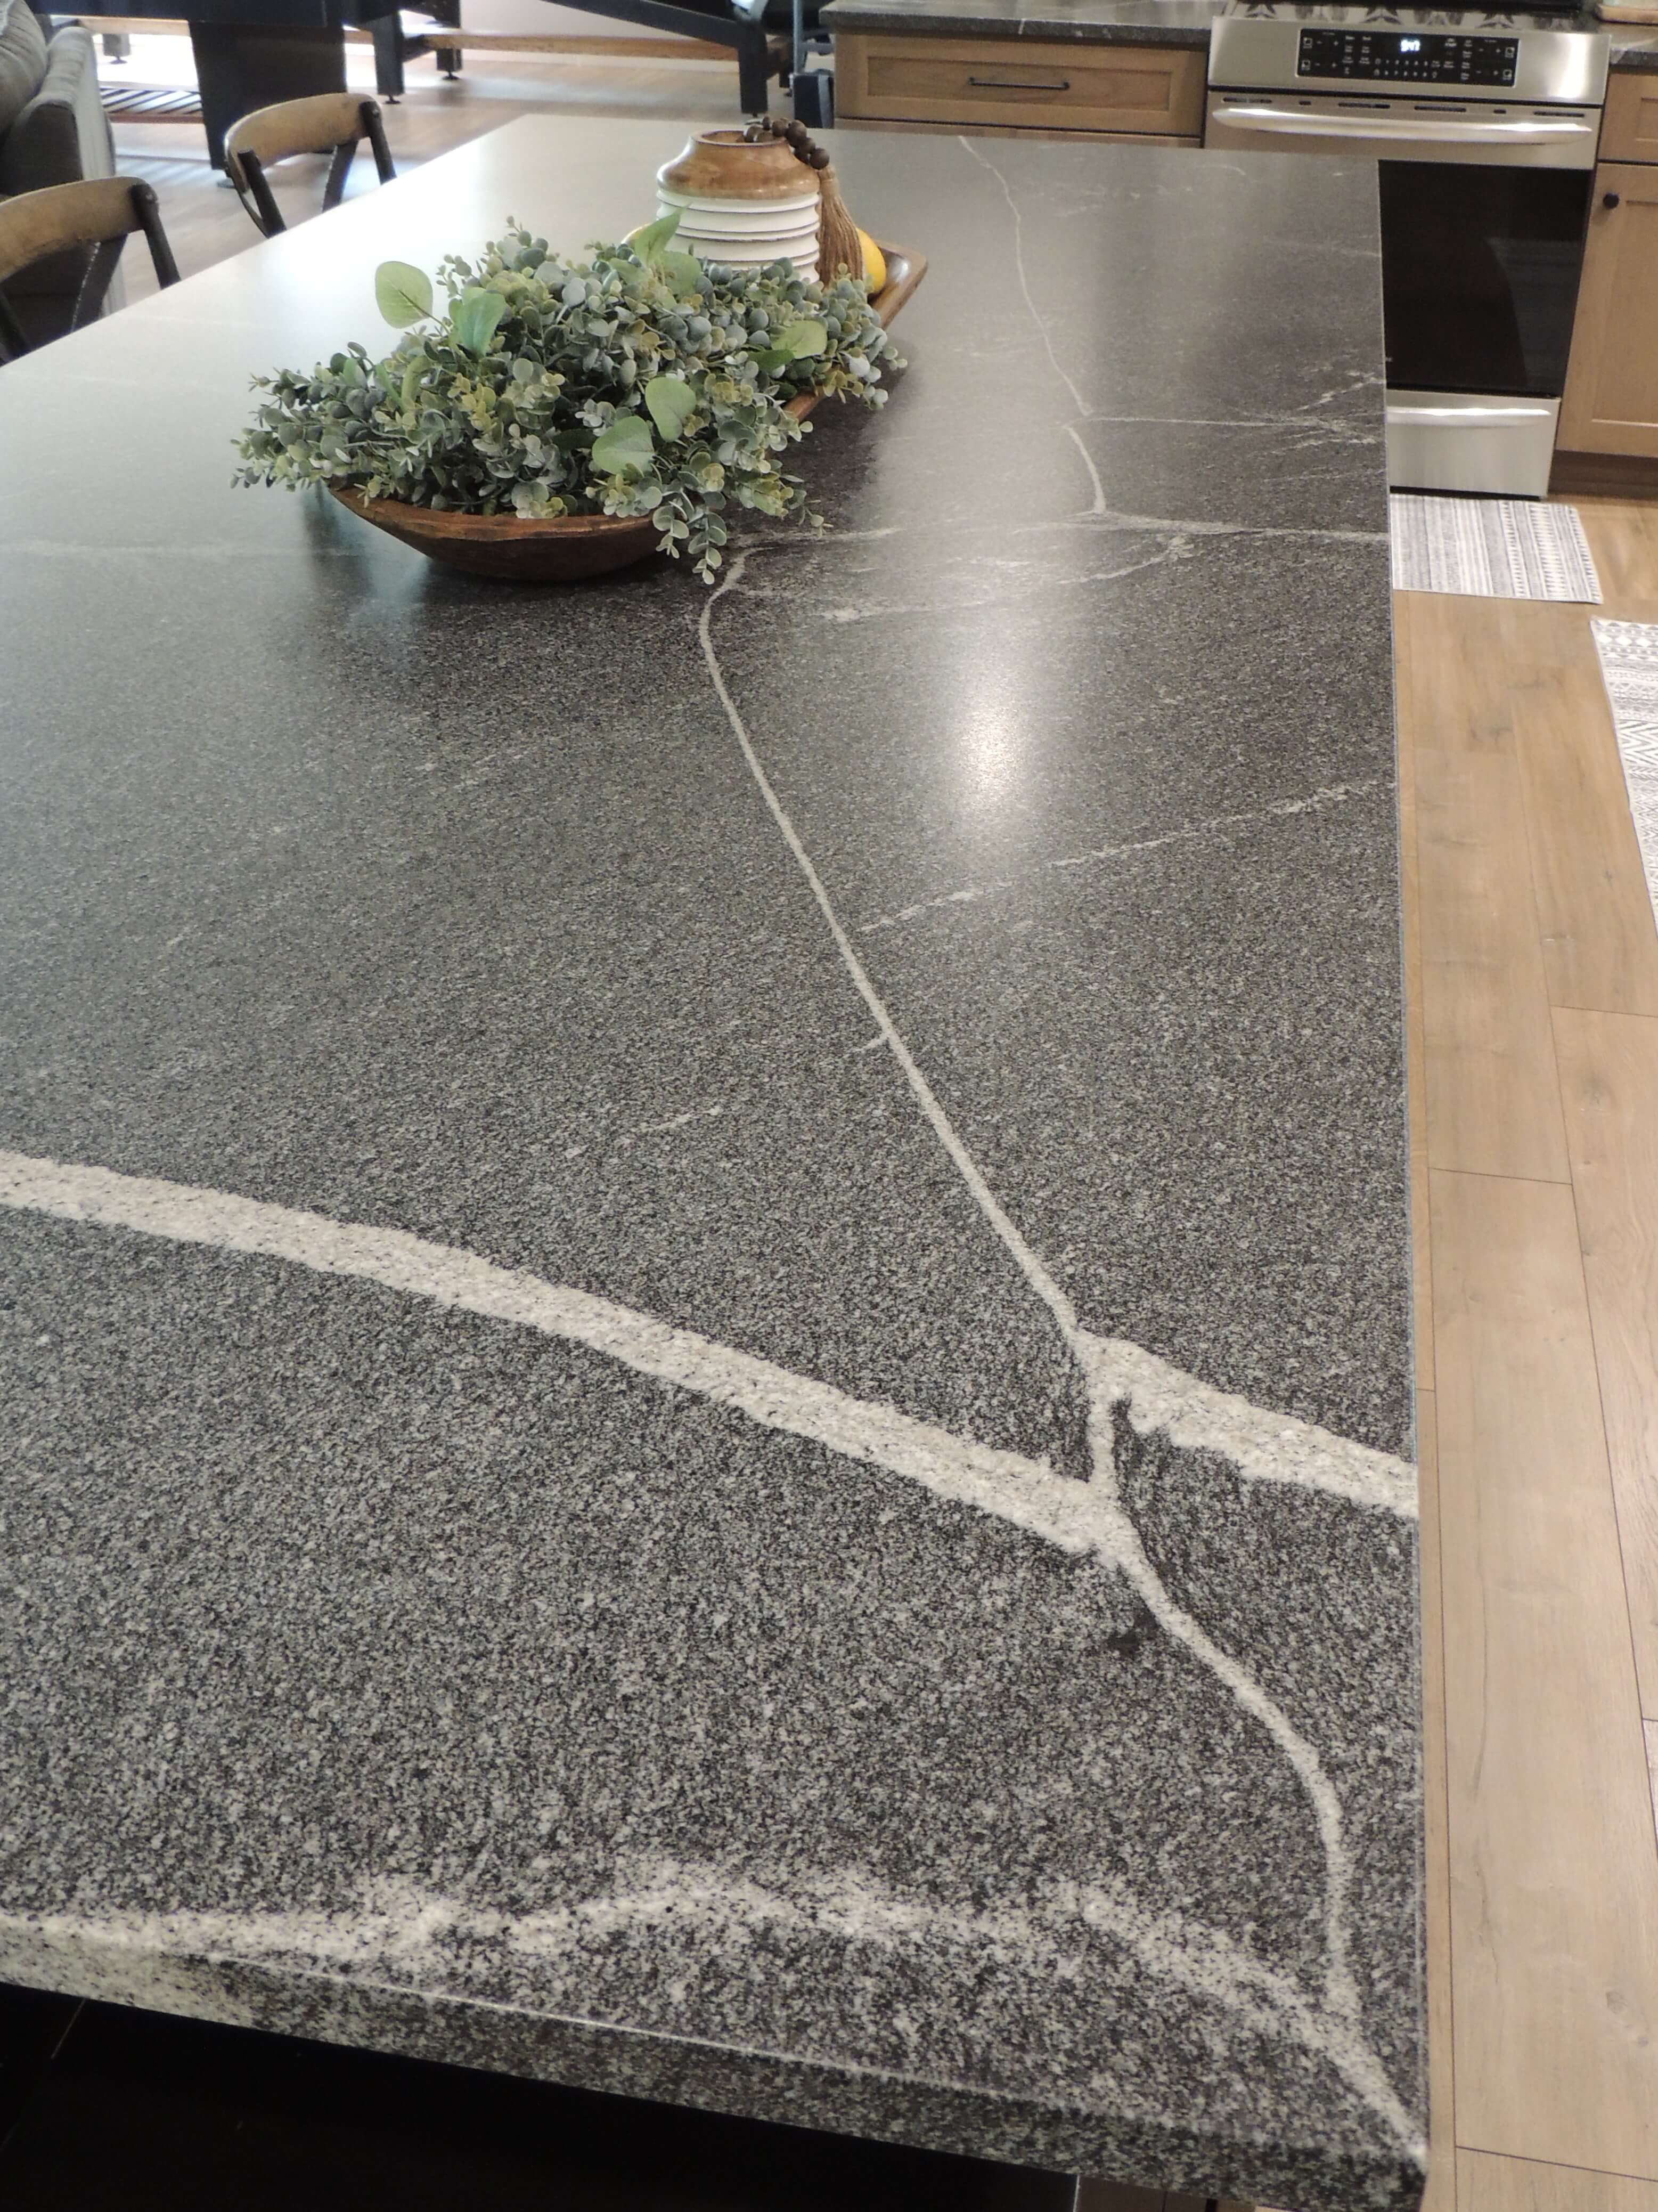 Take a look at the details in the kitchen island countertop with a dark gray, honed granite surface.